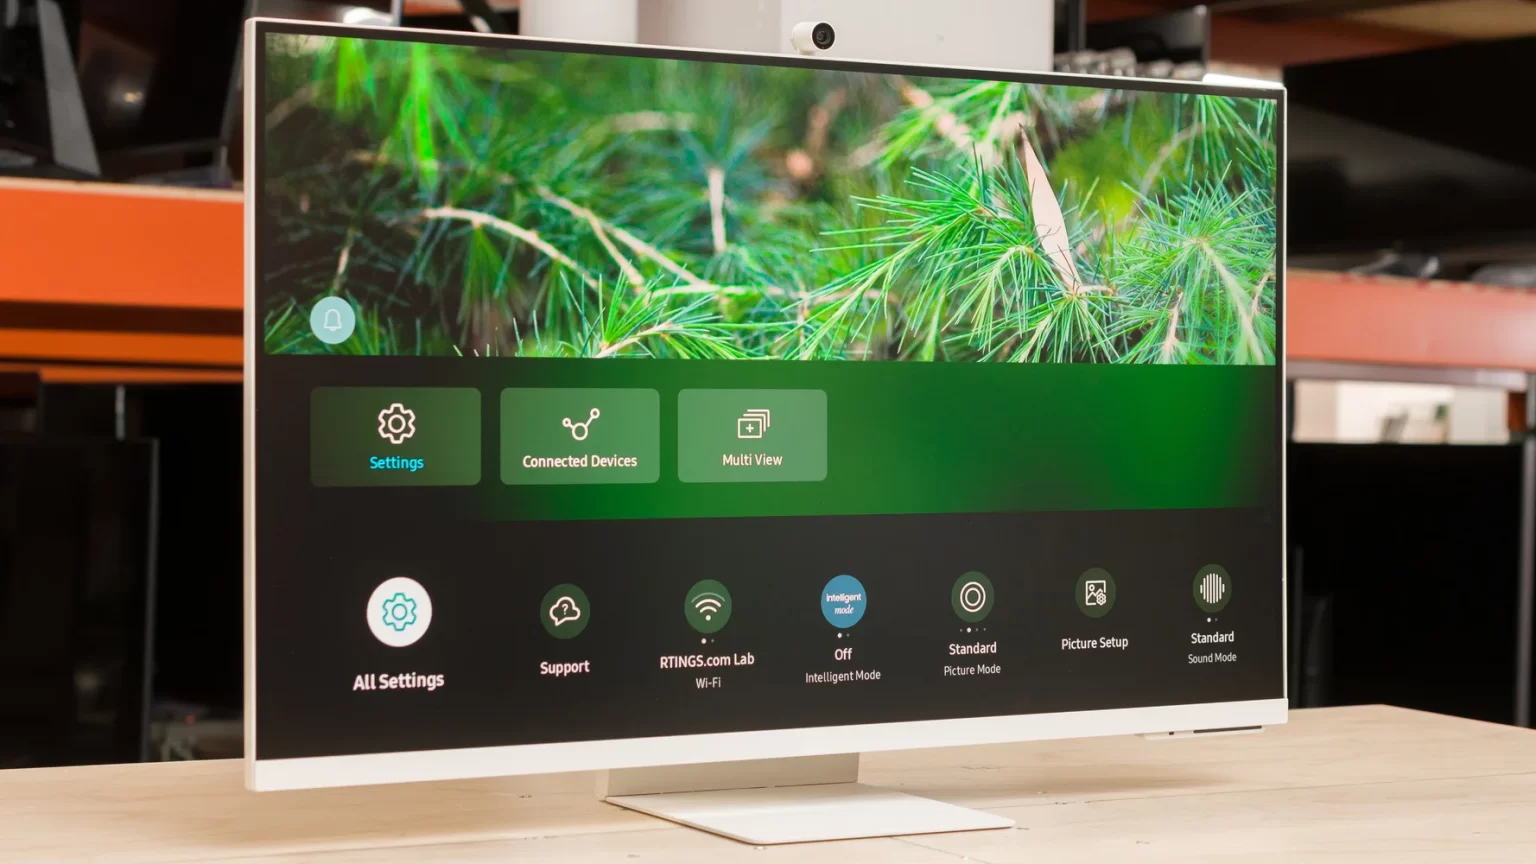 design medium 1536x864 - The Smart Monitor M8 can connect and control hundreds of devices